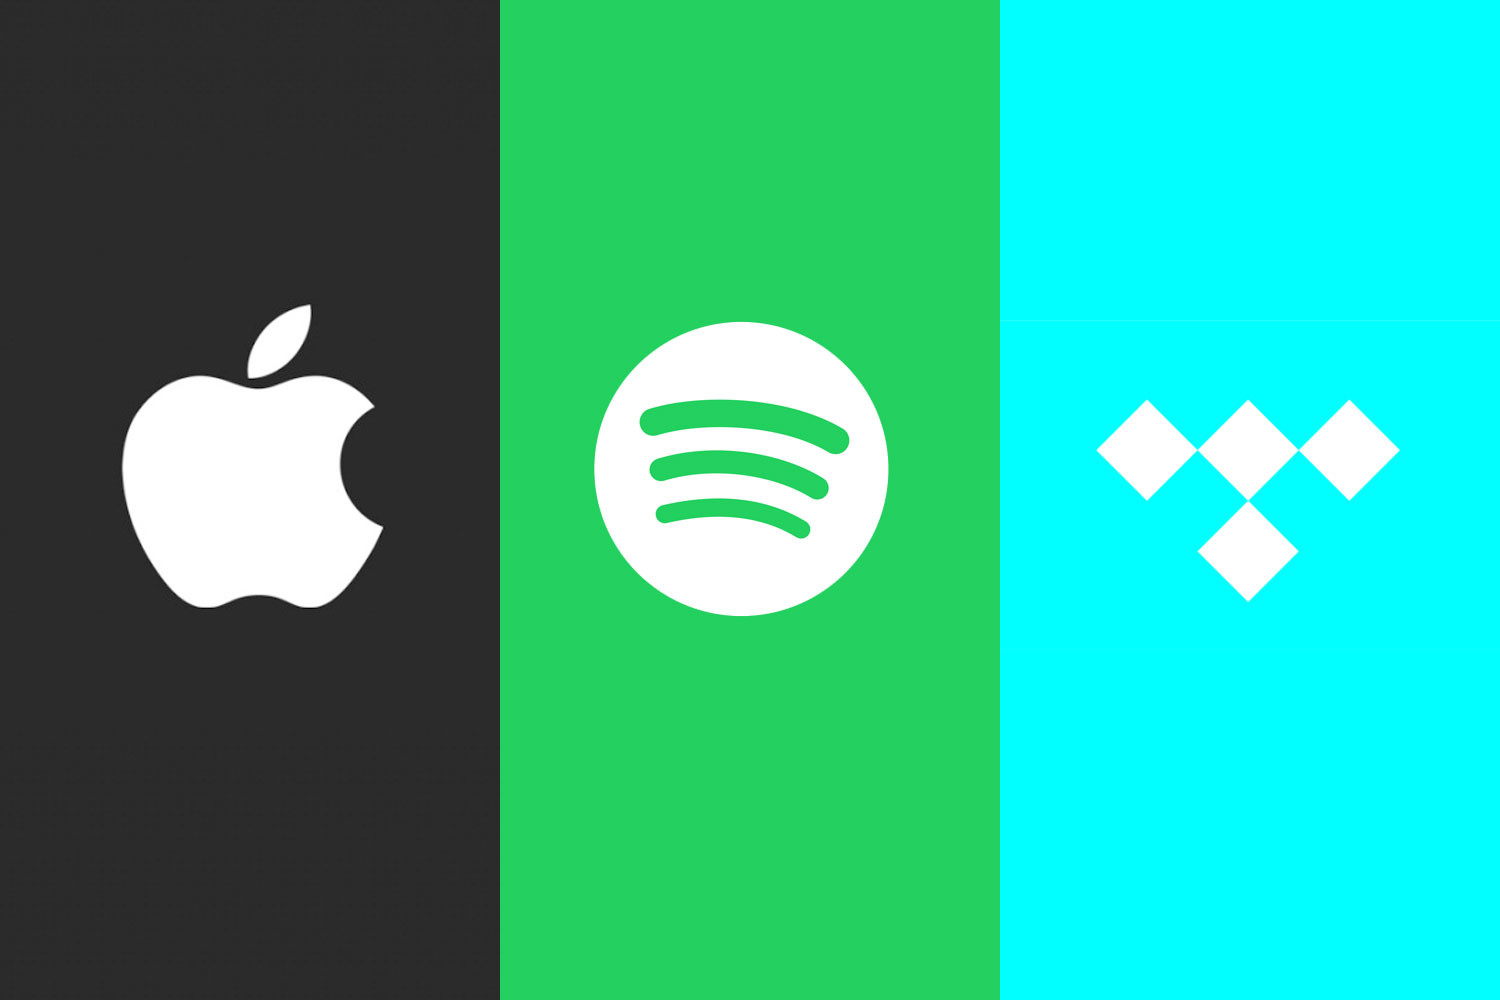 Apple music is catching up, so does Tidal. Source: EveningStandard